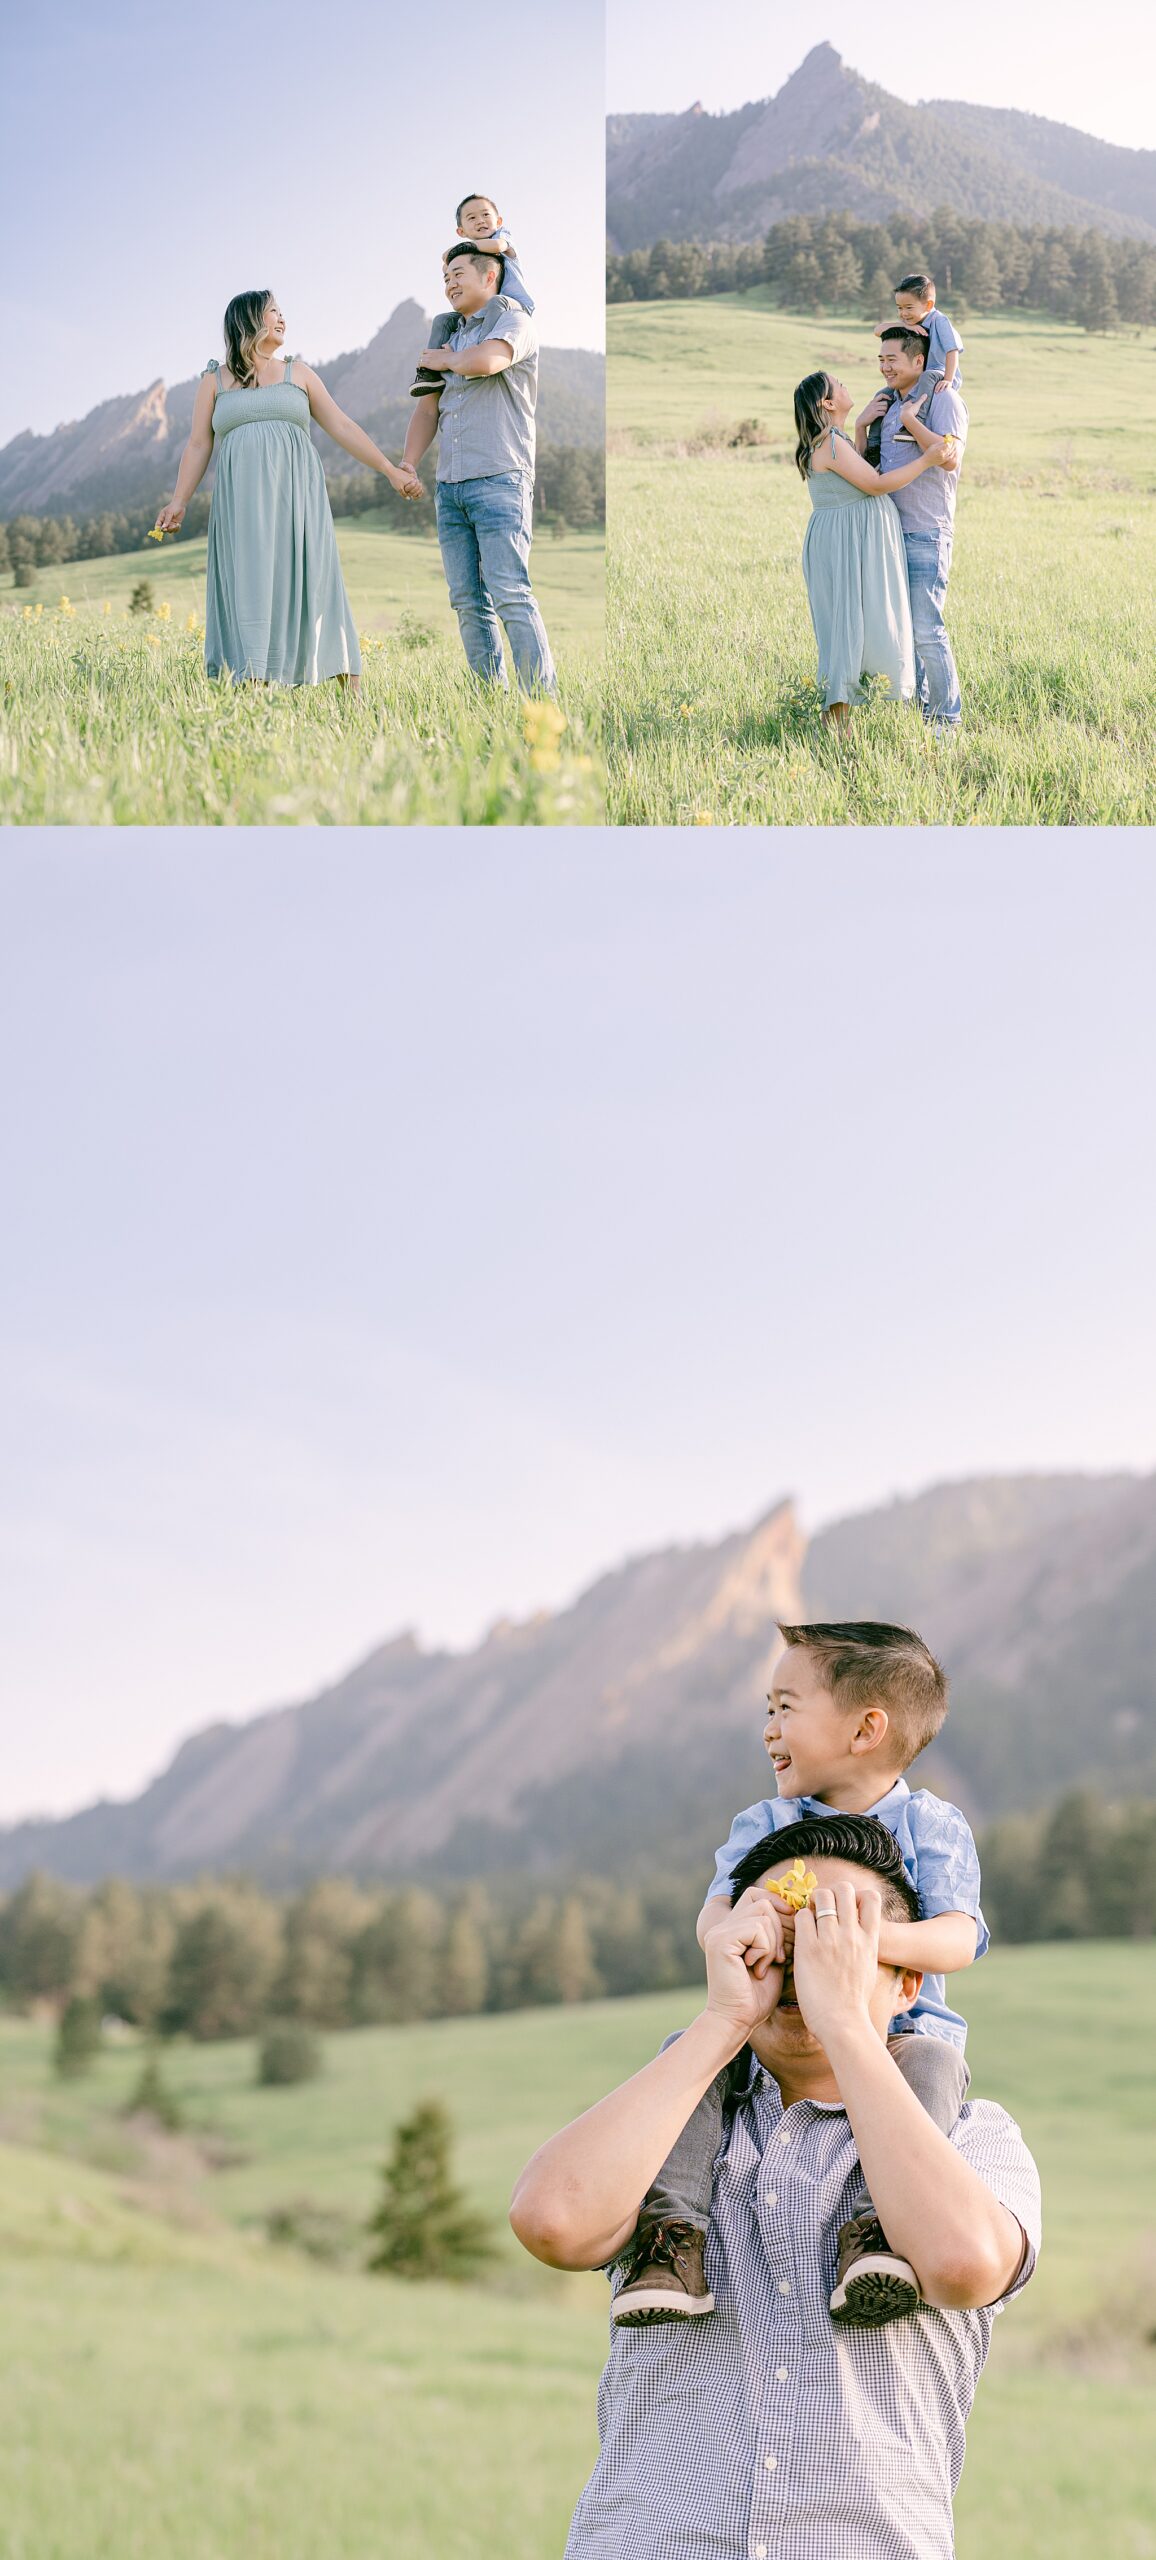 Young family of three having their family photos taken in a field of yellow sunflowers with the Flatirons in the background during spring.